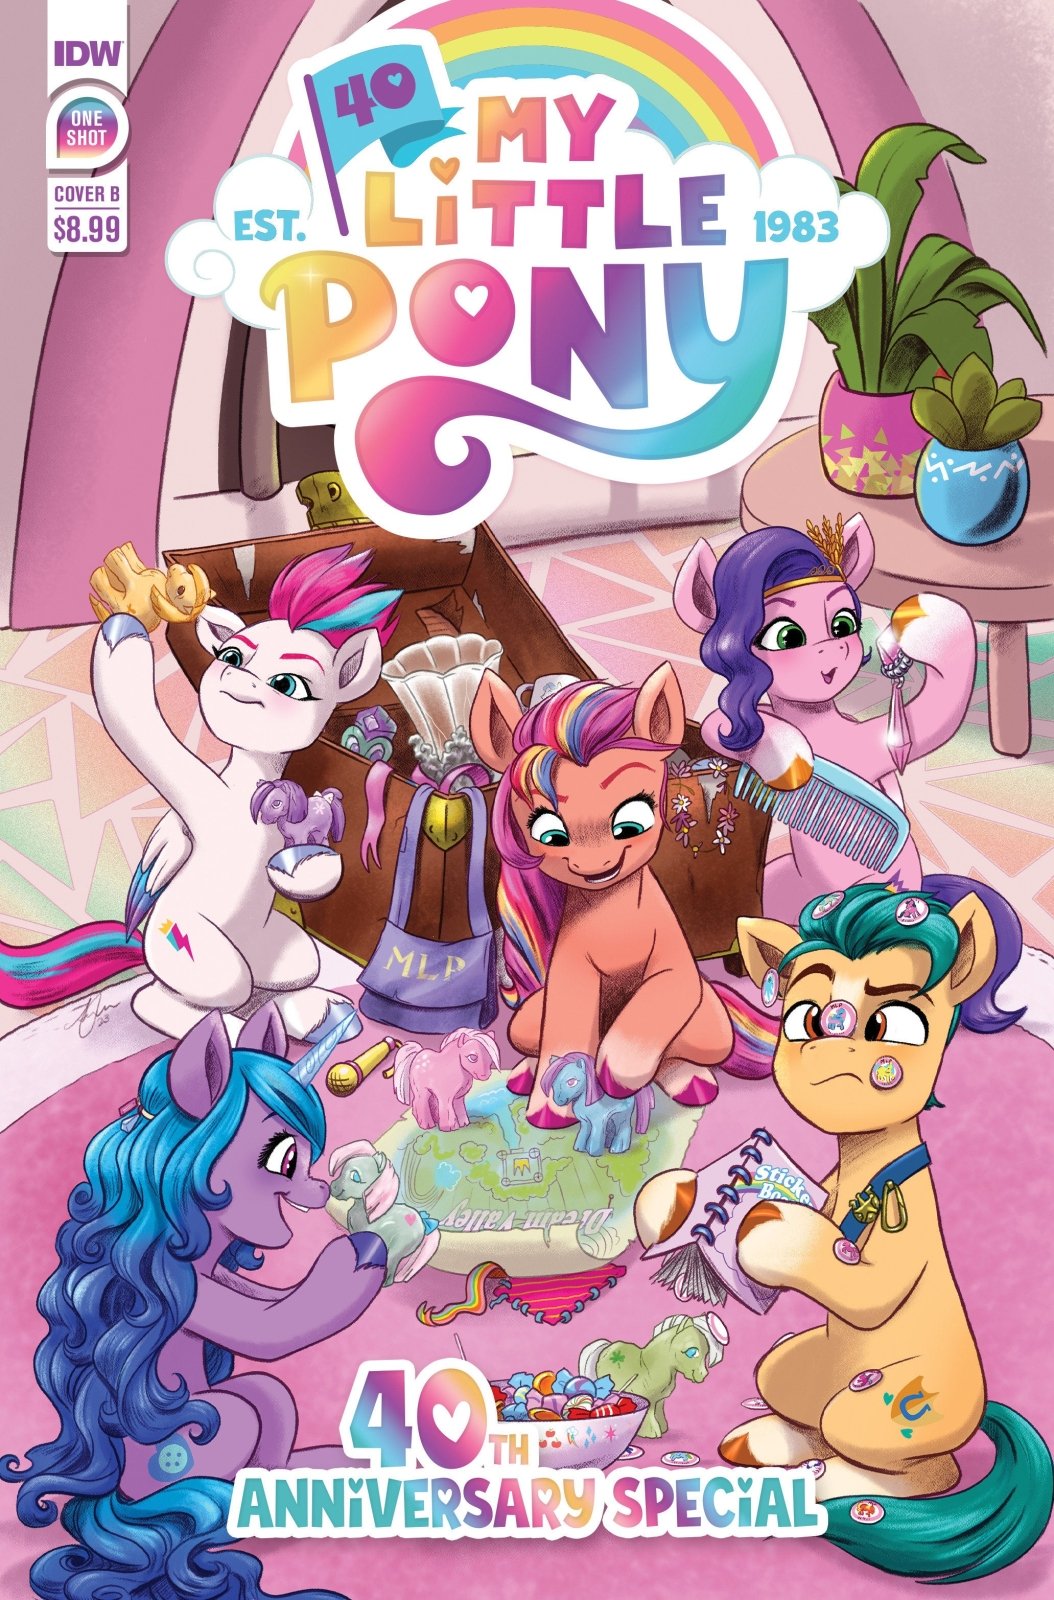 My Little Pony 40th Anniversary Special Variant B (Mebberson) - The Fourth Place